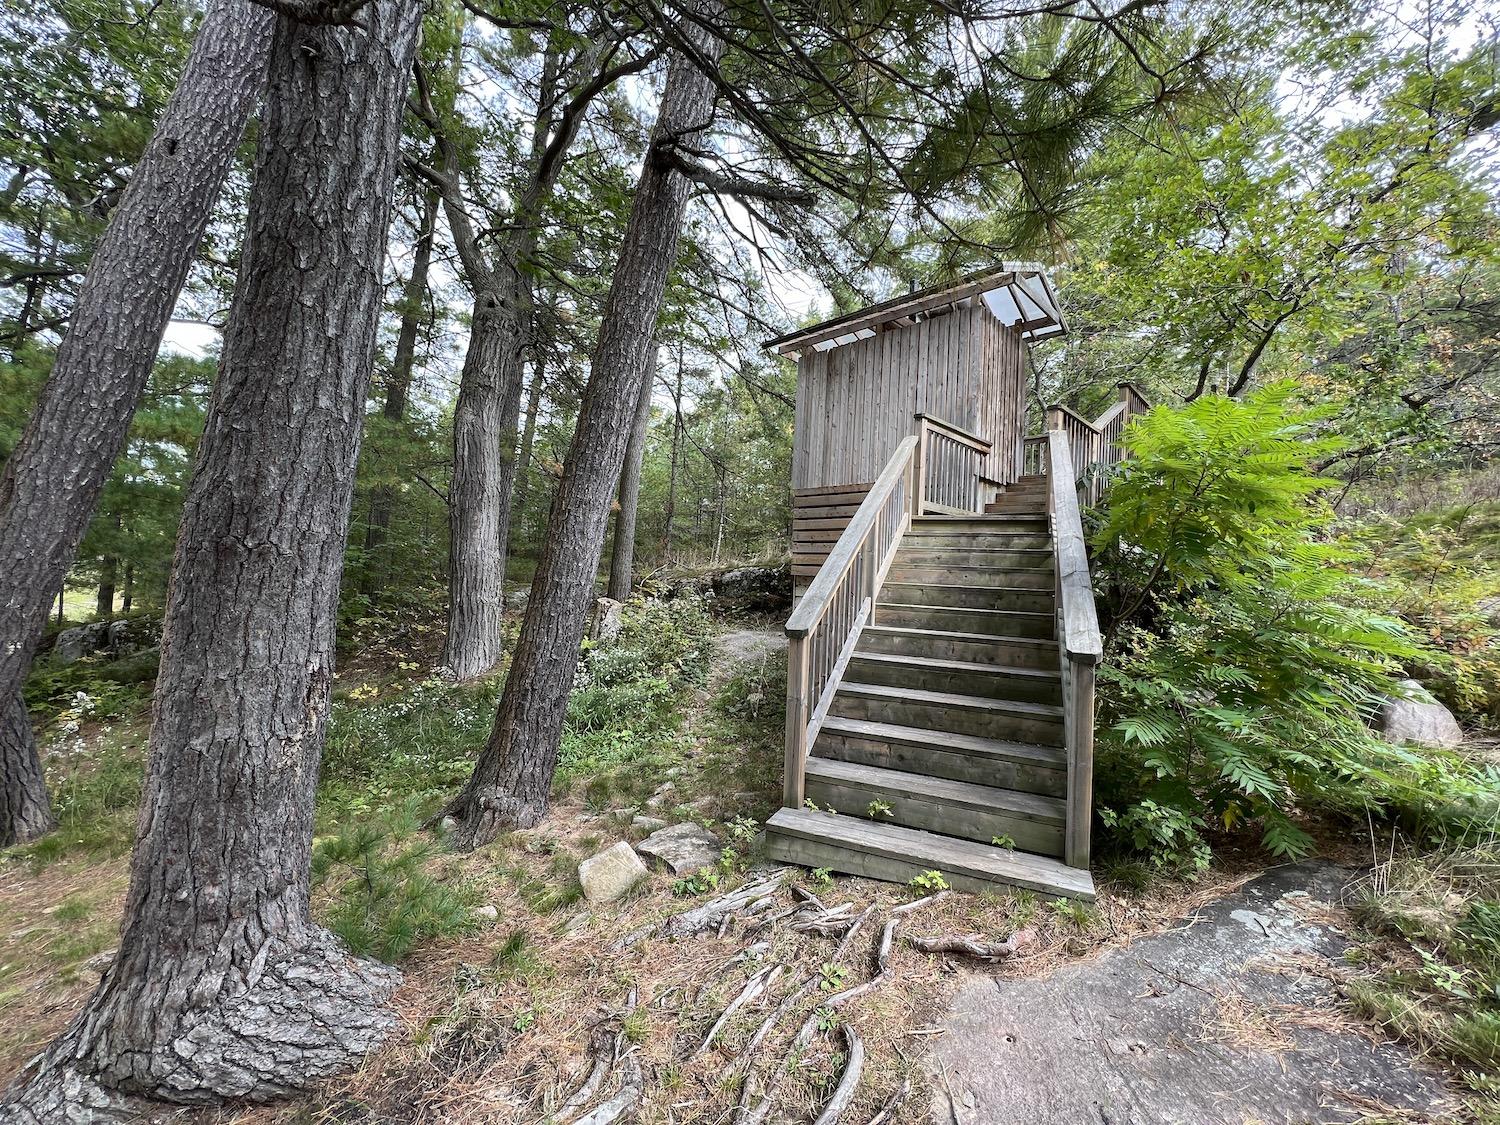 Another two-level outhouse at Georgian Bay Islands National Park in Ontario.